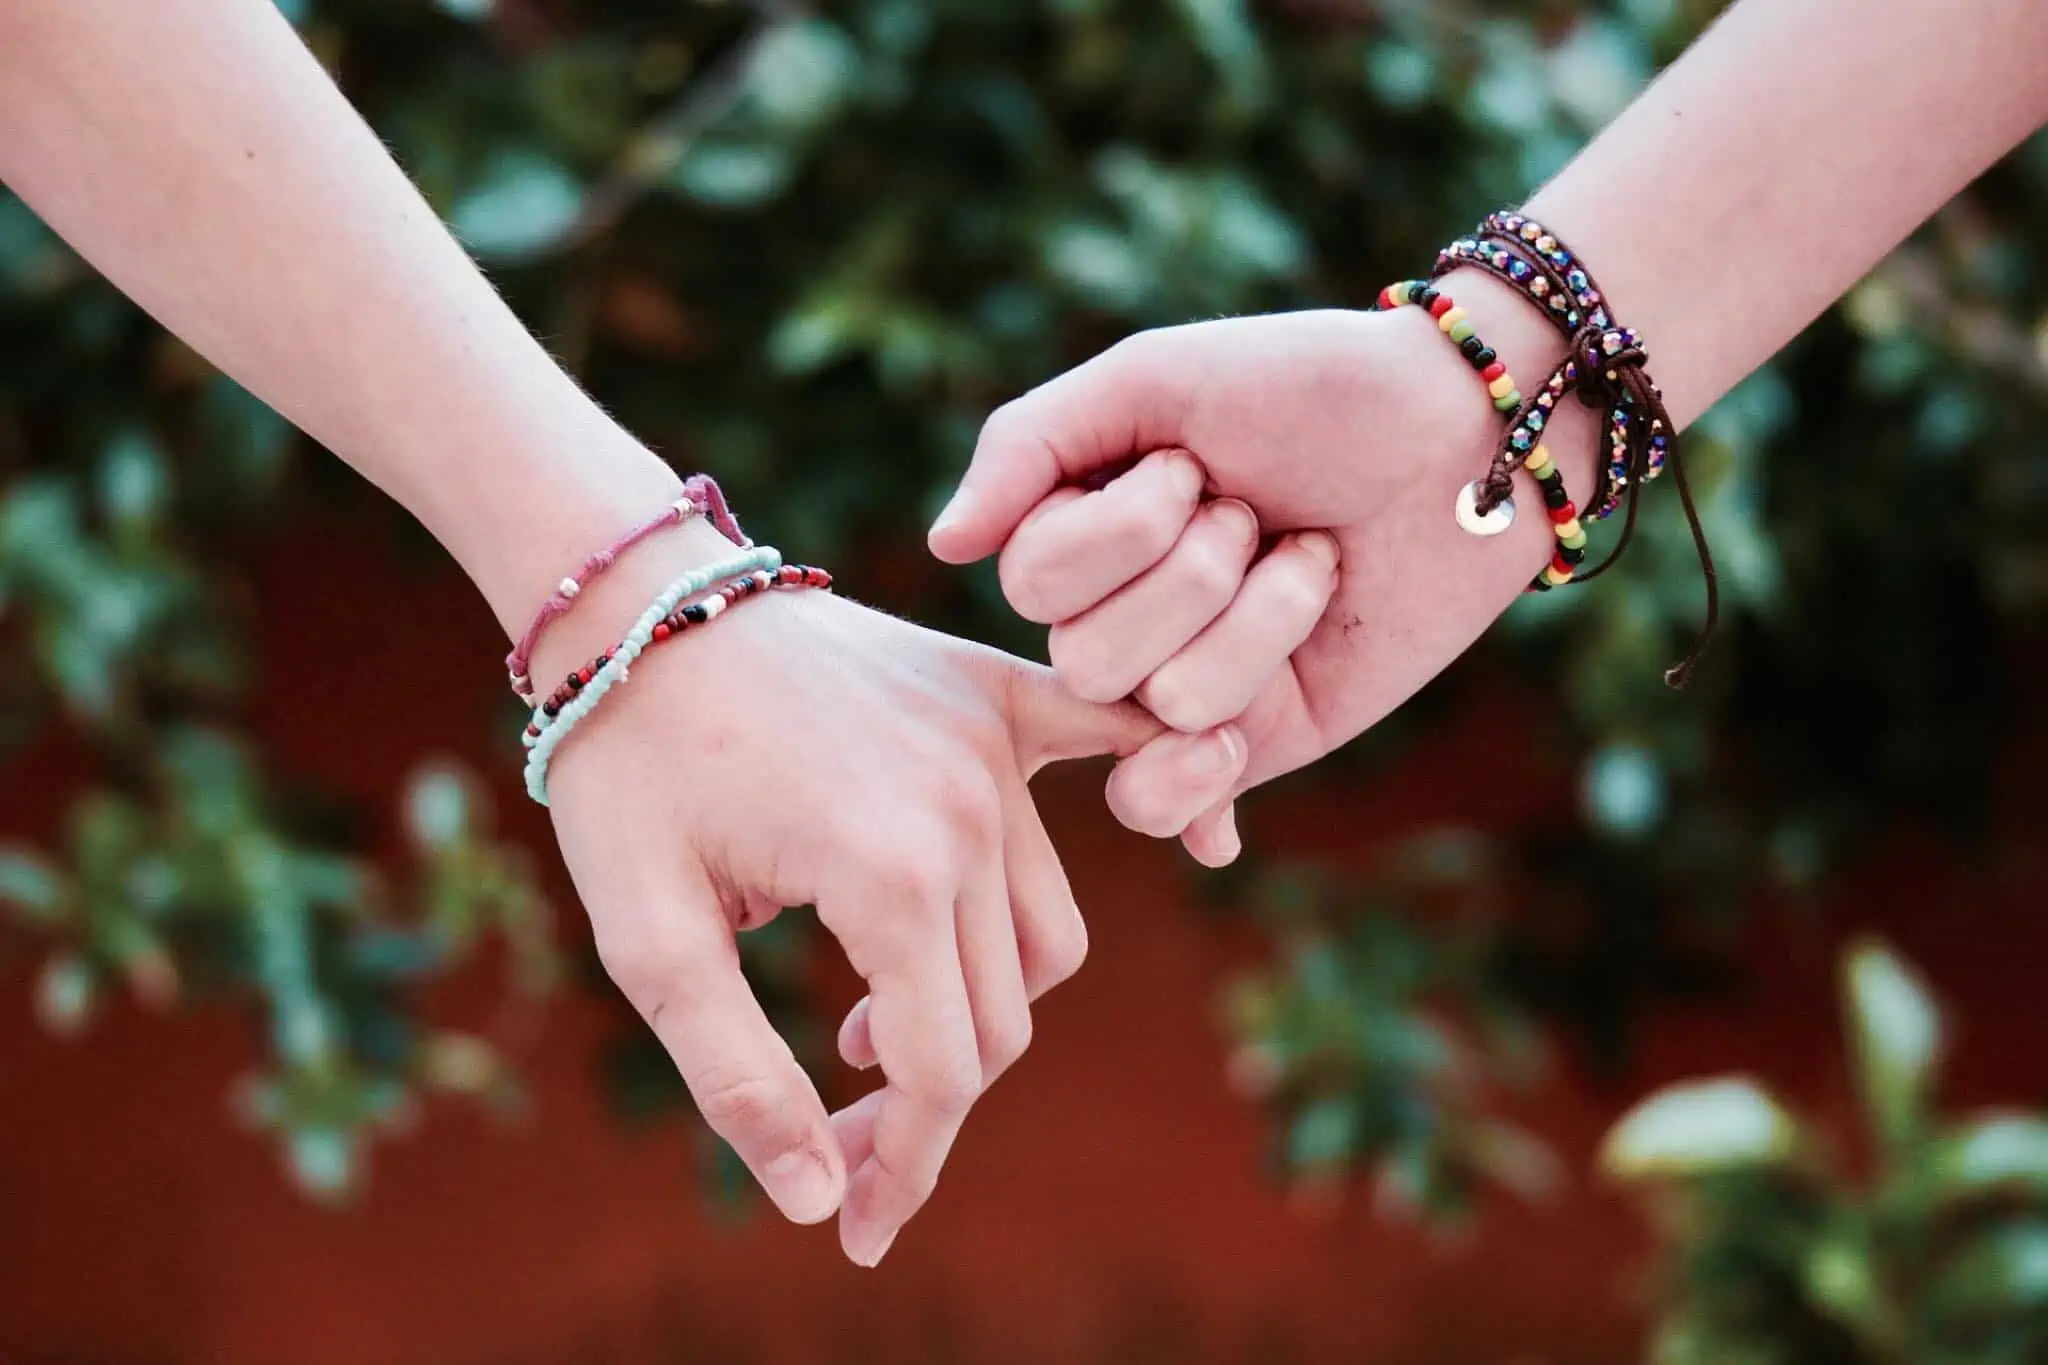 Two people interlocking fingers together in encouragement and kindness.